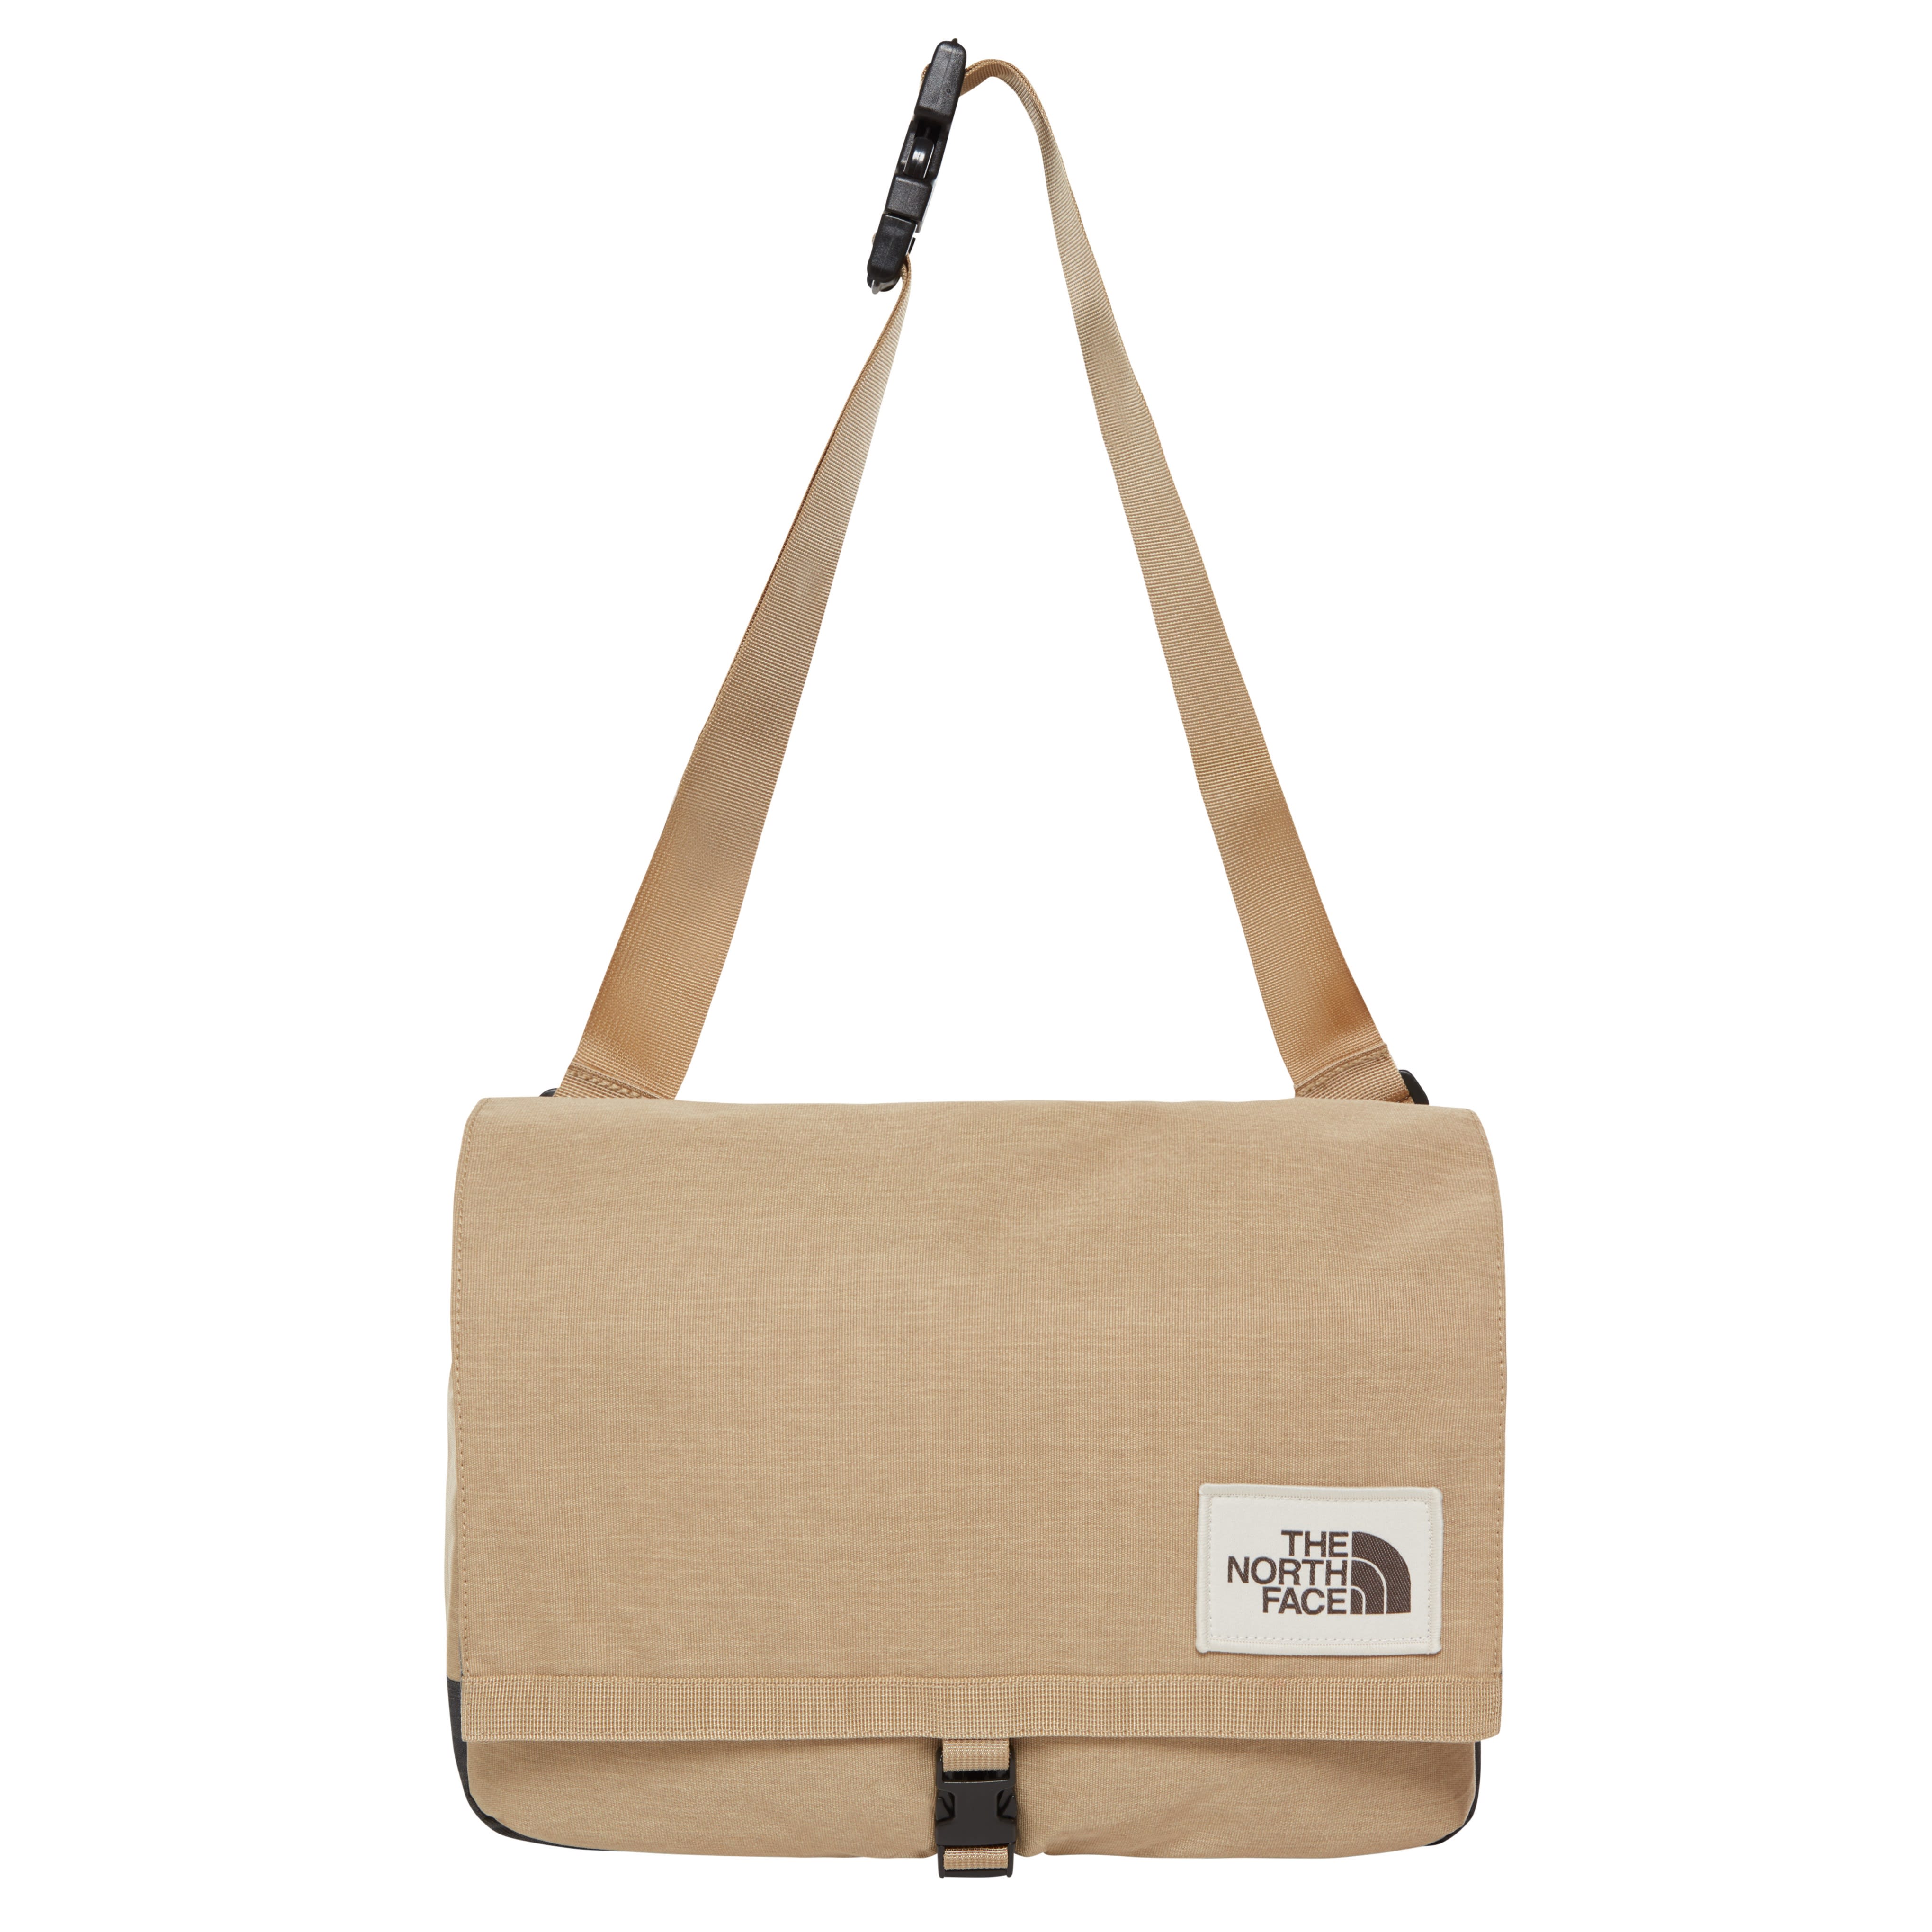 style Leia feminine Buy The North Face Berkeley Satchel from Outnorth